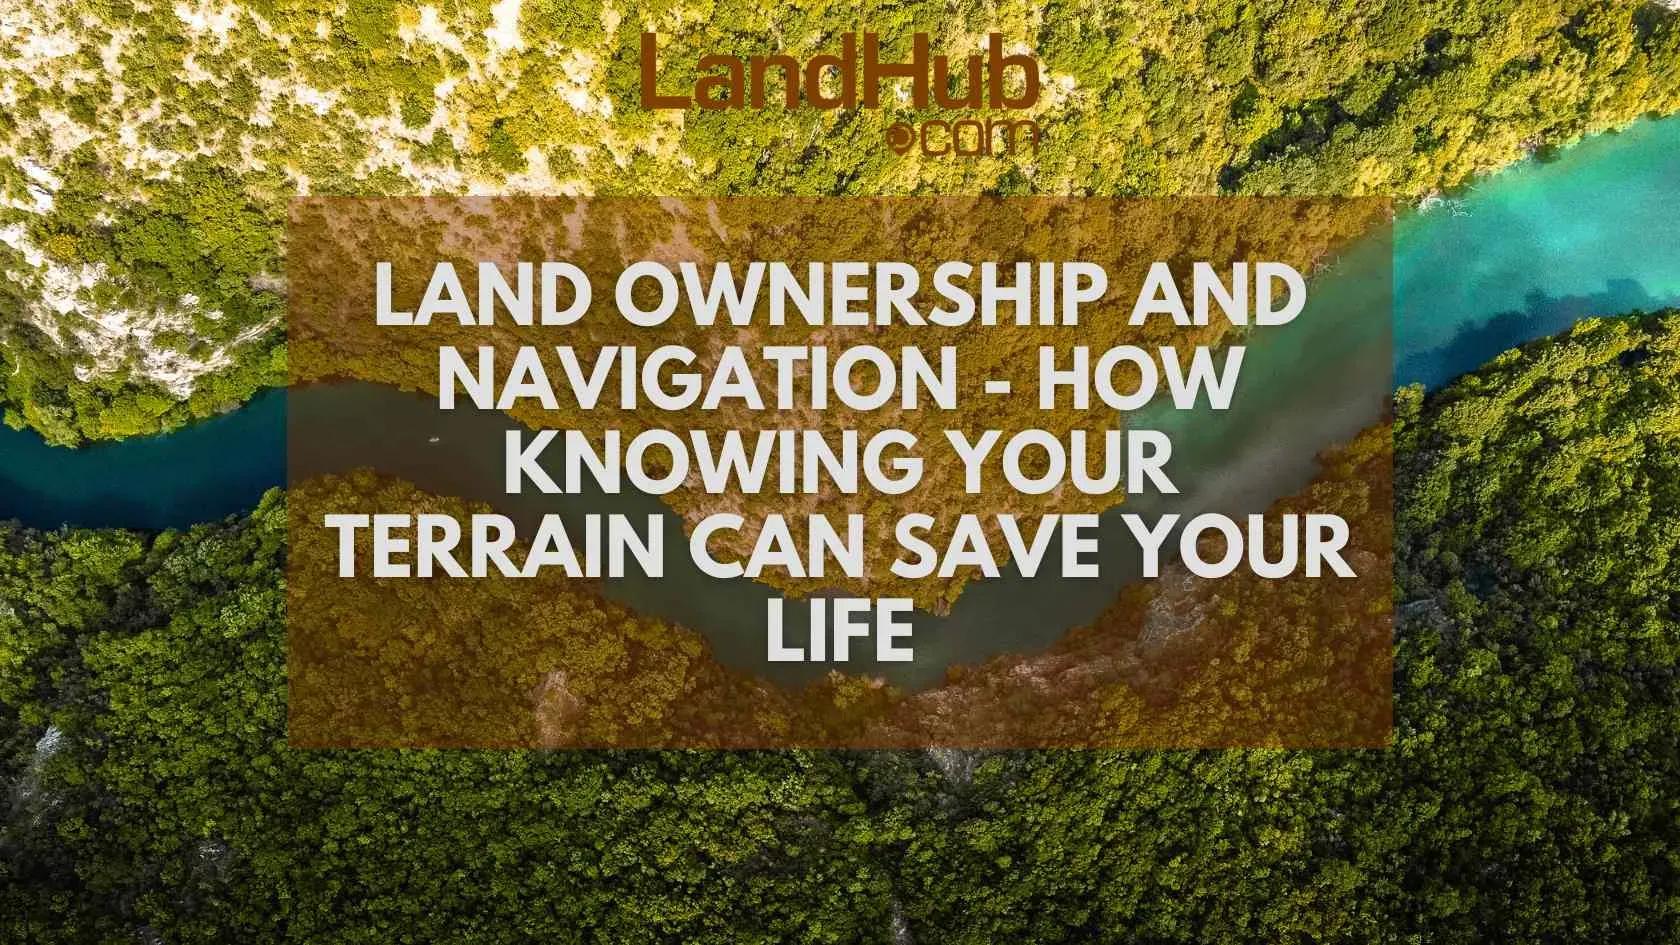 land ownership and navigation- how knowing your terrain can save your life